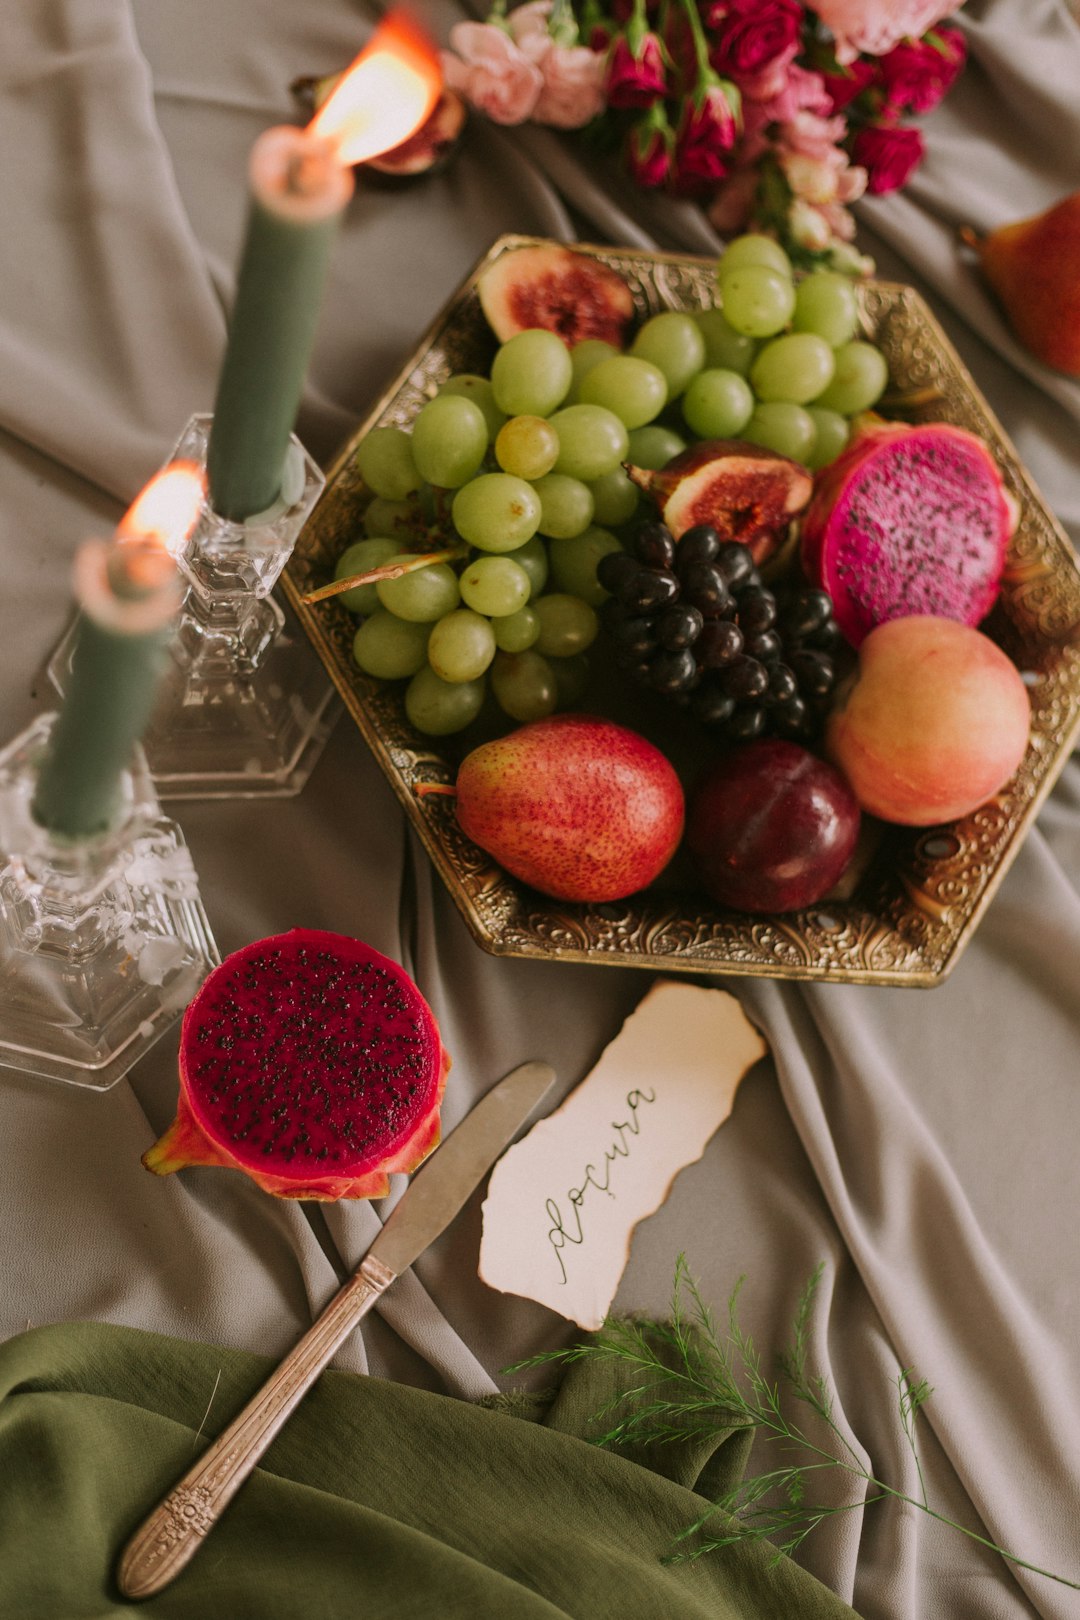 assorted fruits in bowl near lighted green candles